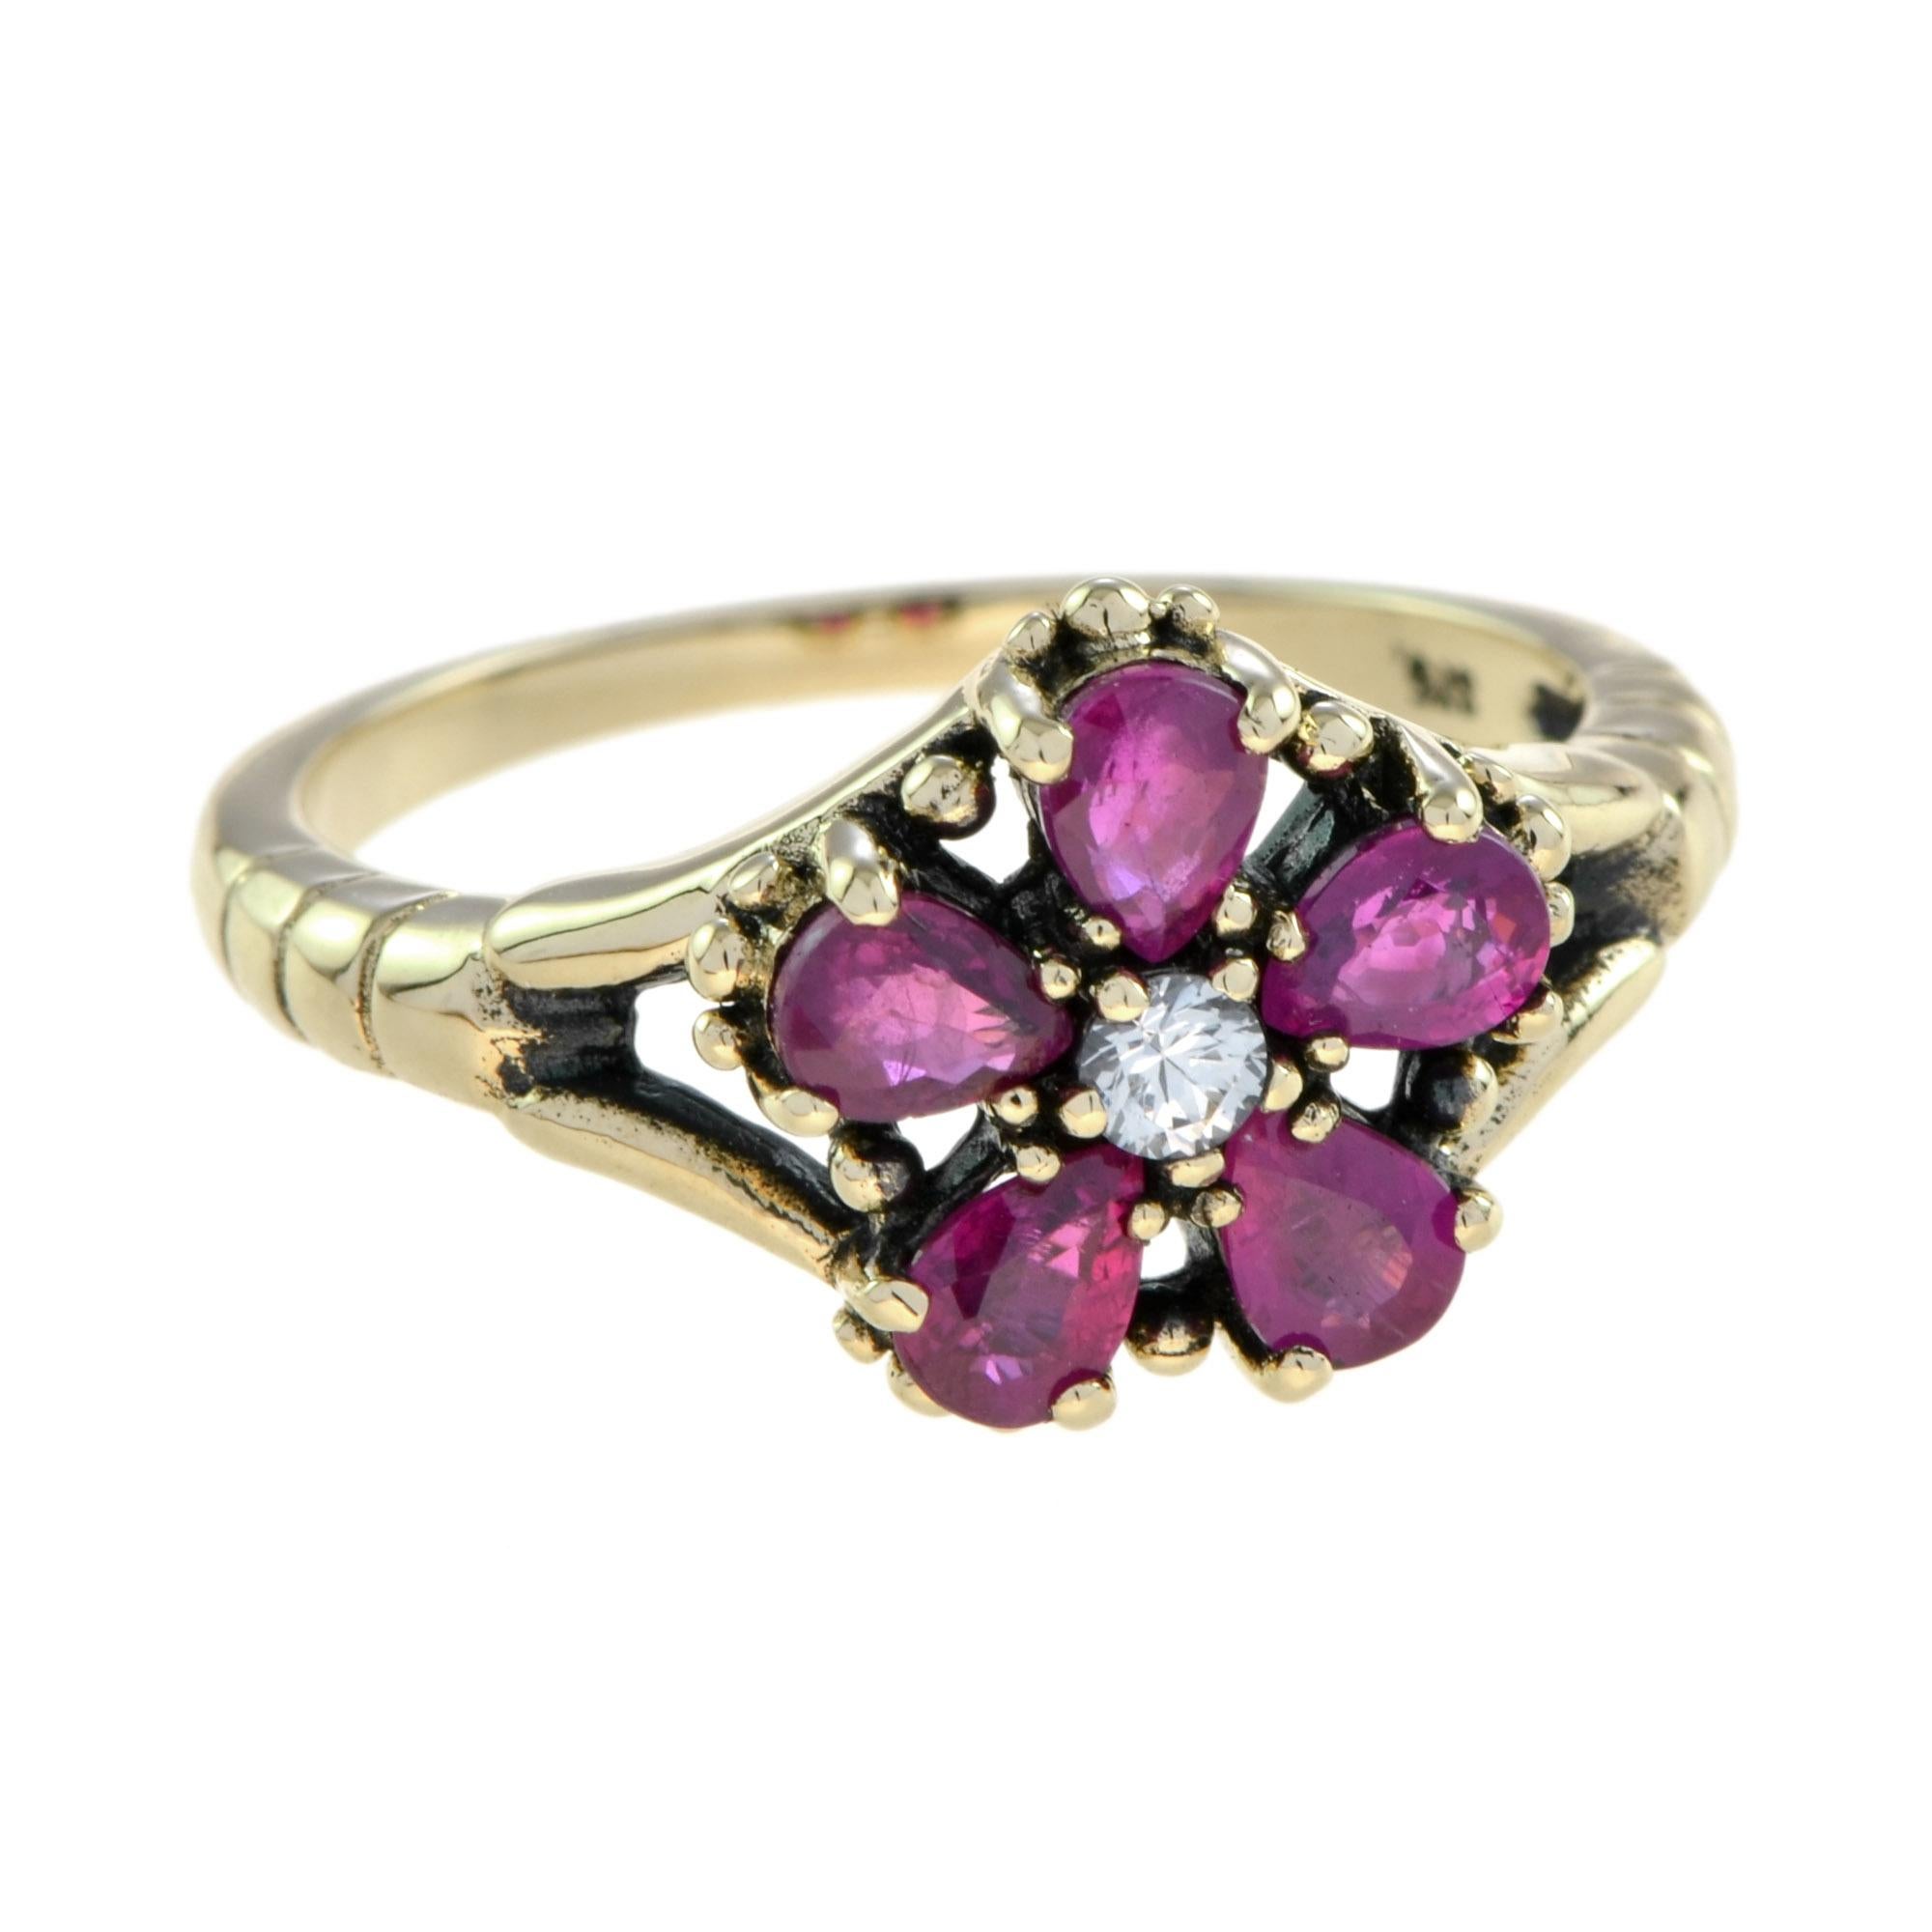 Vintage white sapphire and ruby ring is a classic design that would be a wonderful addition to your fine jewelry collection. A perfect piece to wear all year long, and the floral motif would be wonderful this season with a beautiful spring or summer